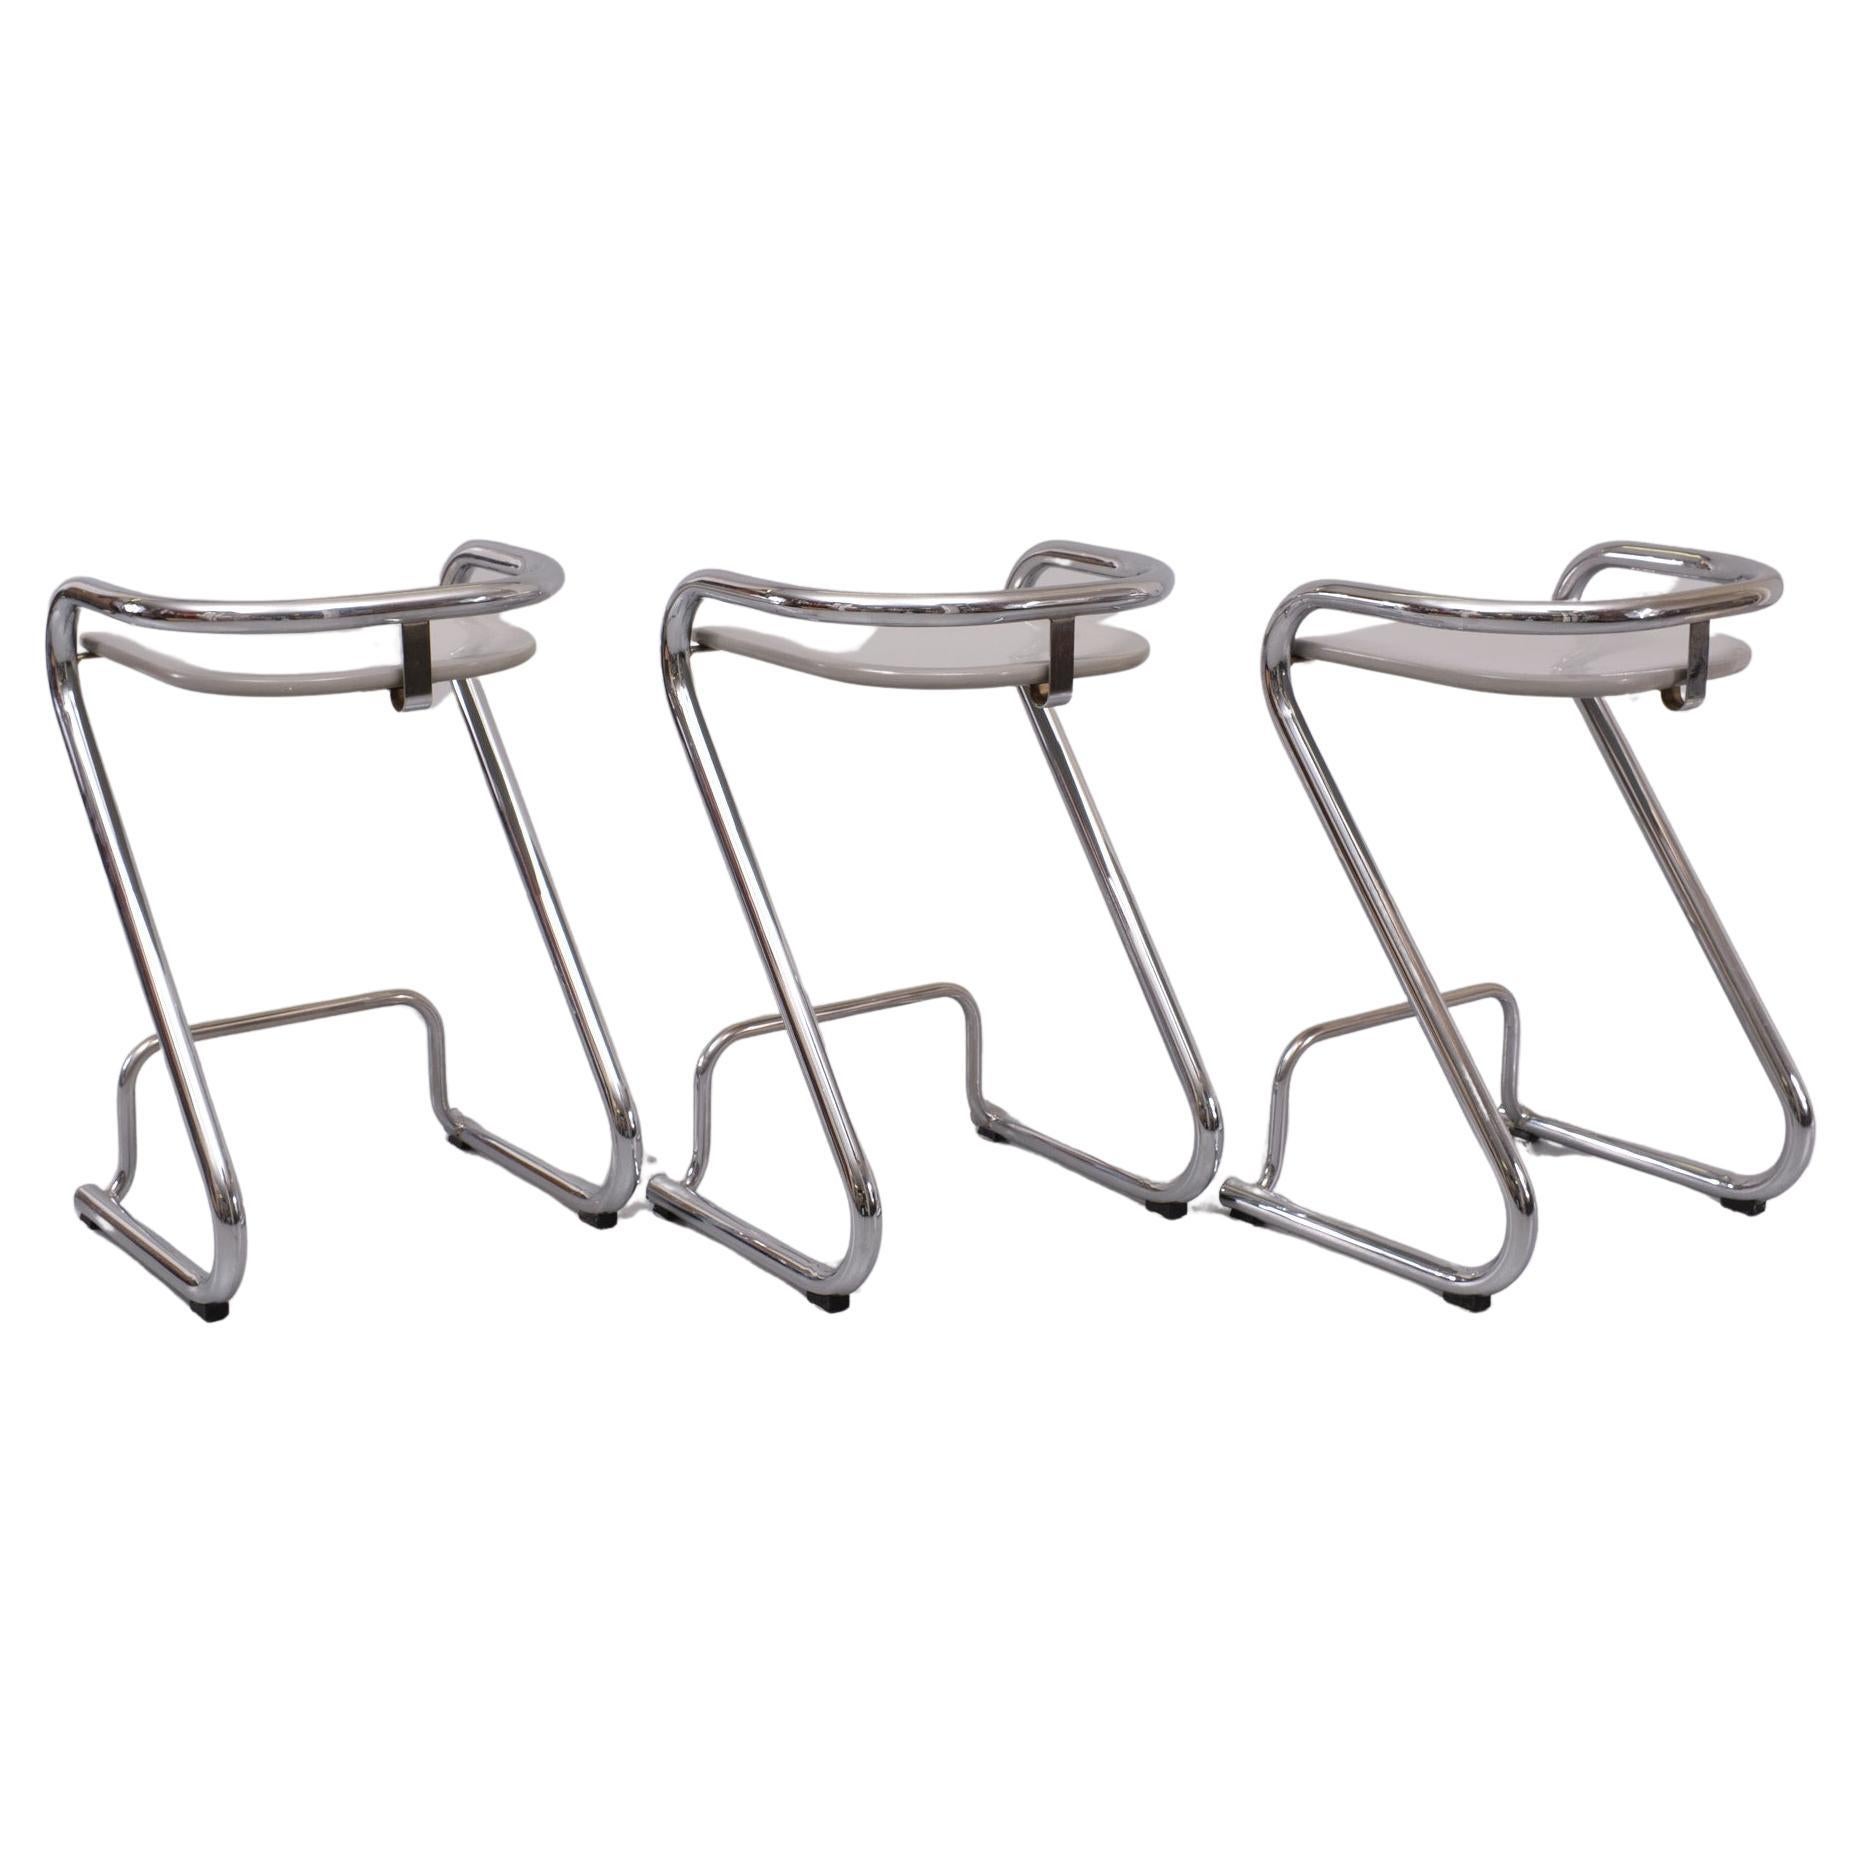 The set of 3 bar stools S 70-3, designed by Lindau and Lindekrantz in 1968 for Lammhults, is in very good condition. The curved chrome is perfect, as are the iGrey colored Wooden seat shells. Early 1960s version Lammhults is a Swedish manufacturer